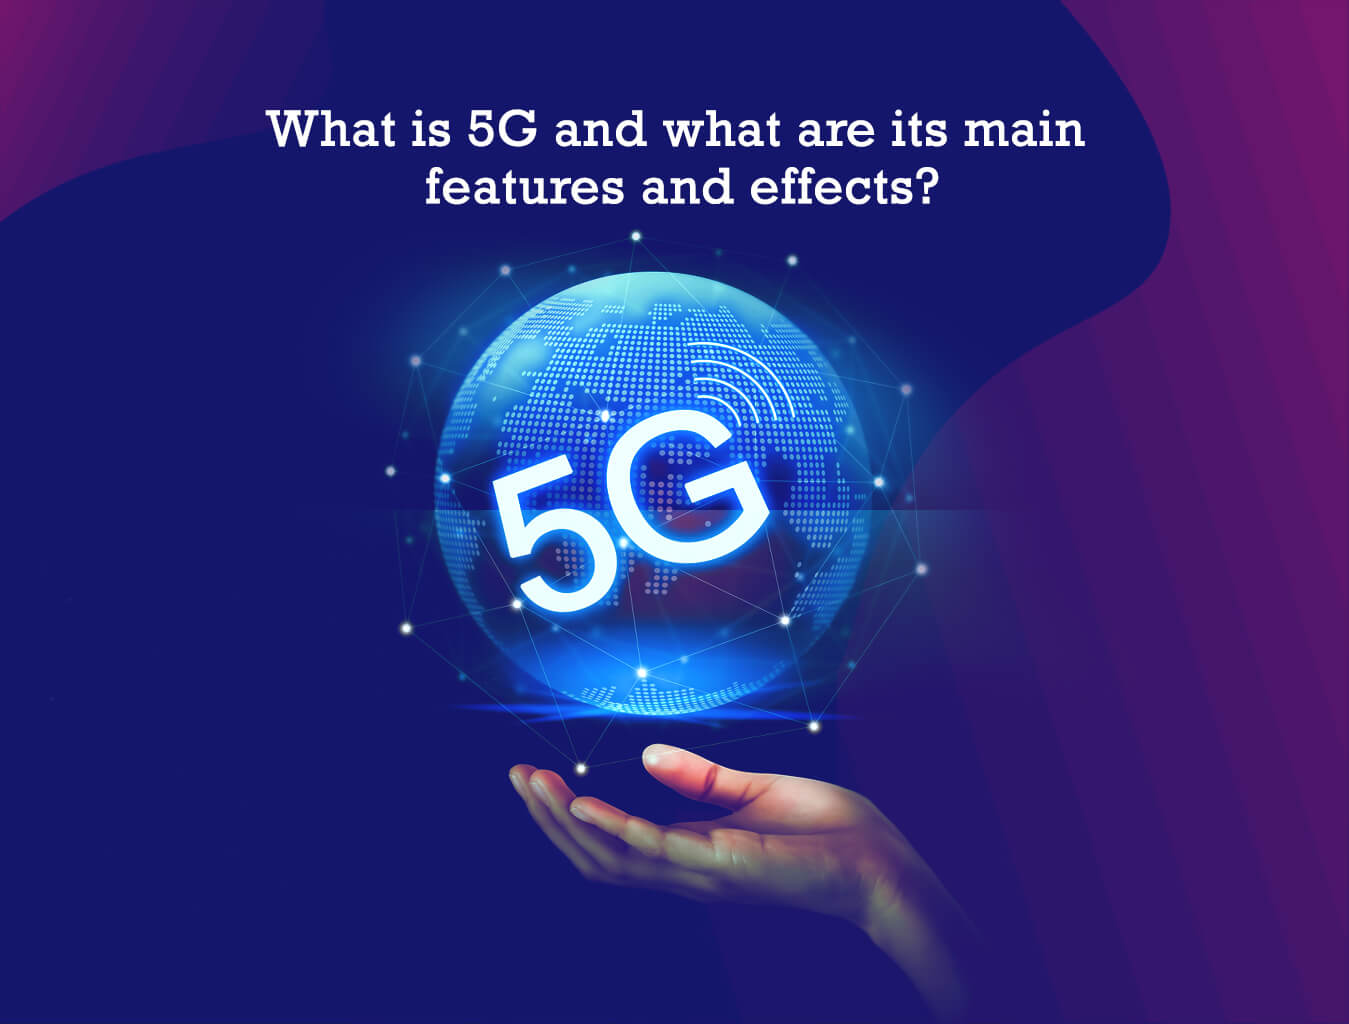 What is 5G and what are its main features and effects?